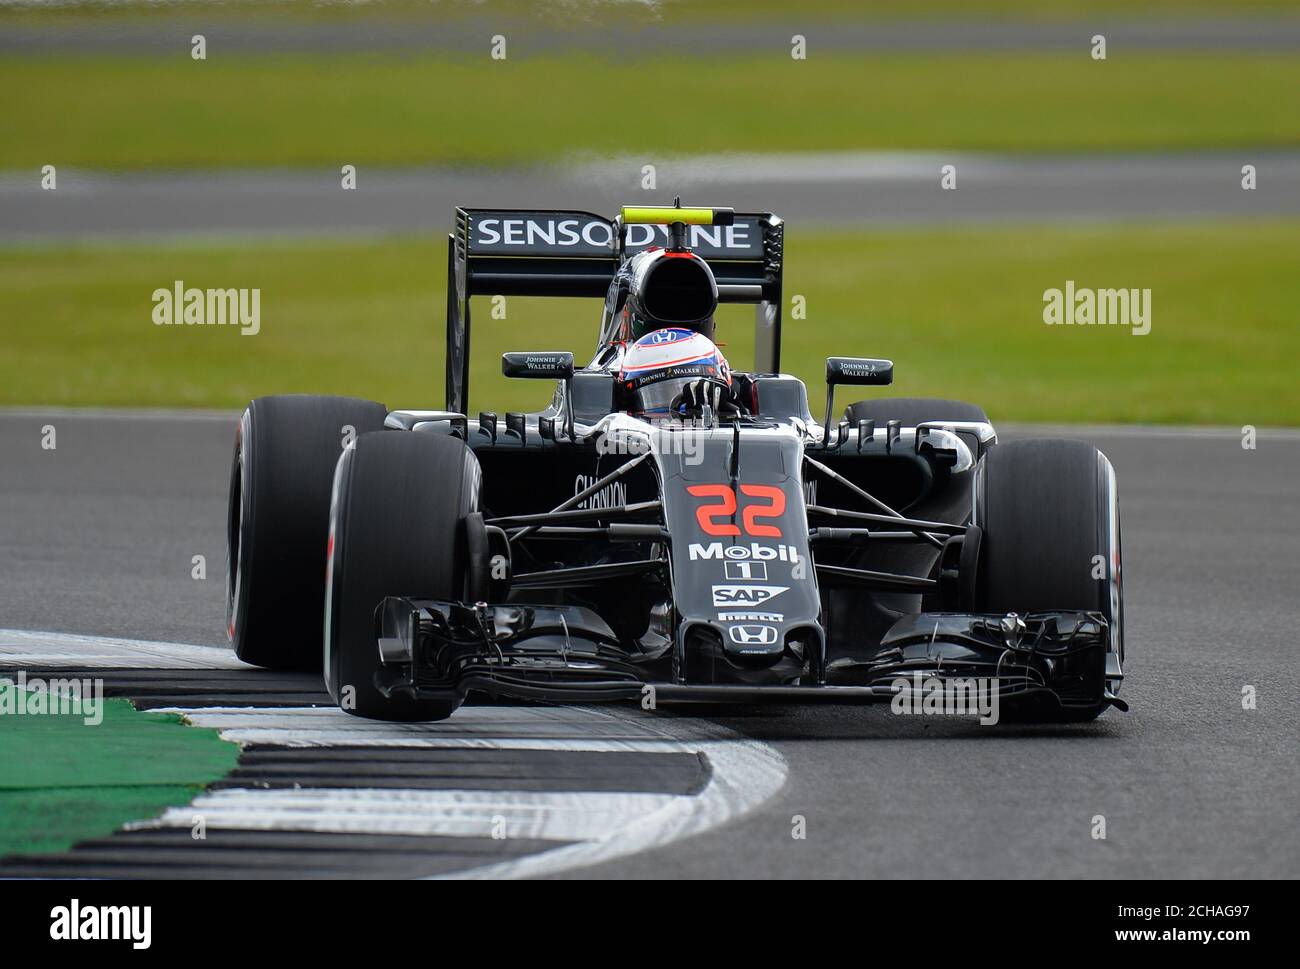 McLaren's Jenson Button during Practice Day for the 2016 British Grand Prix at Silverstone Circuit, Towcester. PRESS ASSOCIATION Photo. Picture date: Friday July 8, 2016. See PA story AUTO British. Photo credit should read: Tony Marshall/PA Wire. RESTRICTIONS: Editorial use only. Commercial use with prior consent from teams. Call +44 (0)1158 447447 for further information. Stock Photo